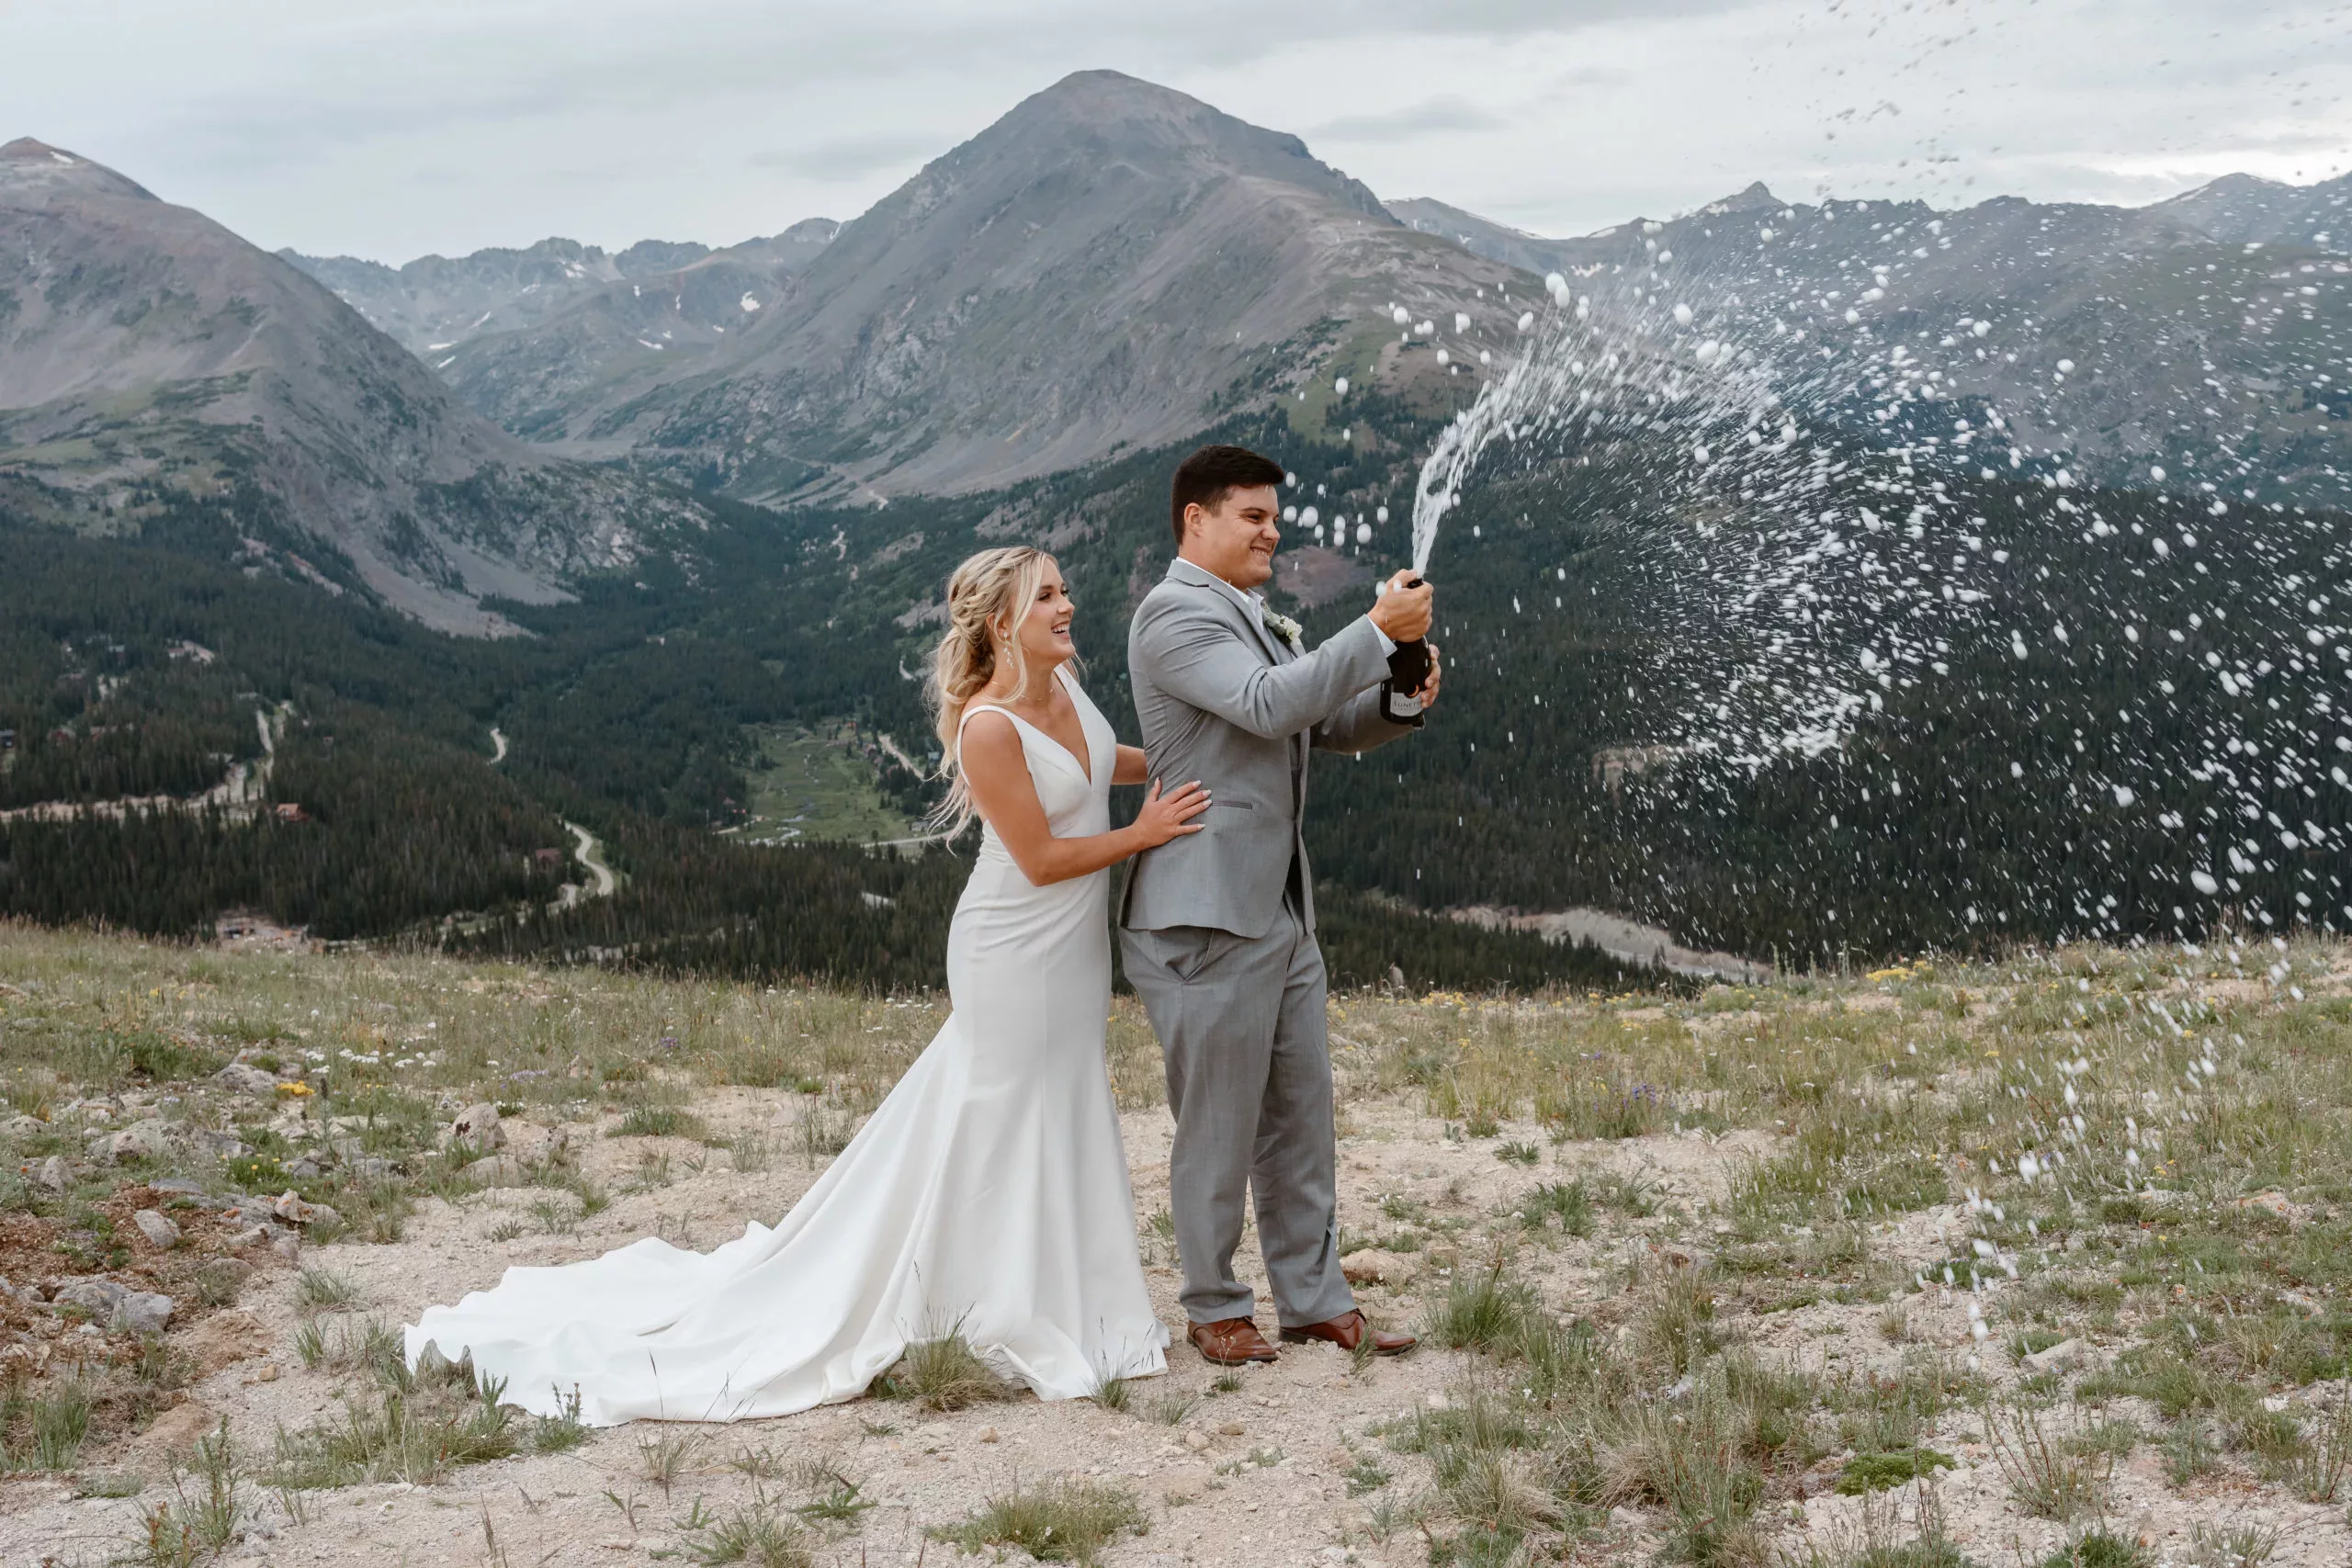 A bride and groom pop champagne at the top of a Colorado mountain during their Sapphire Point wedding.